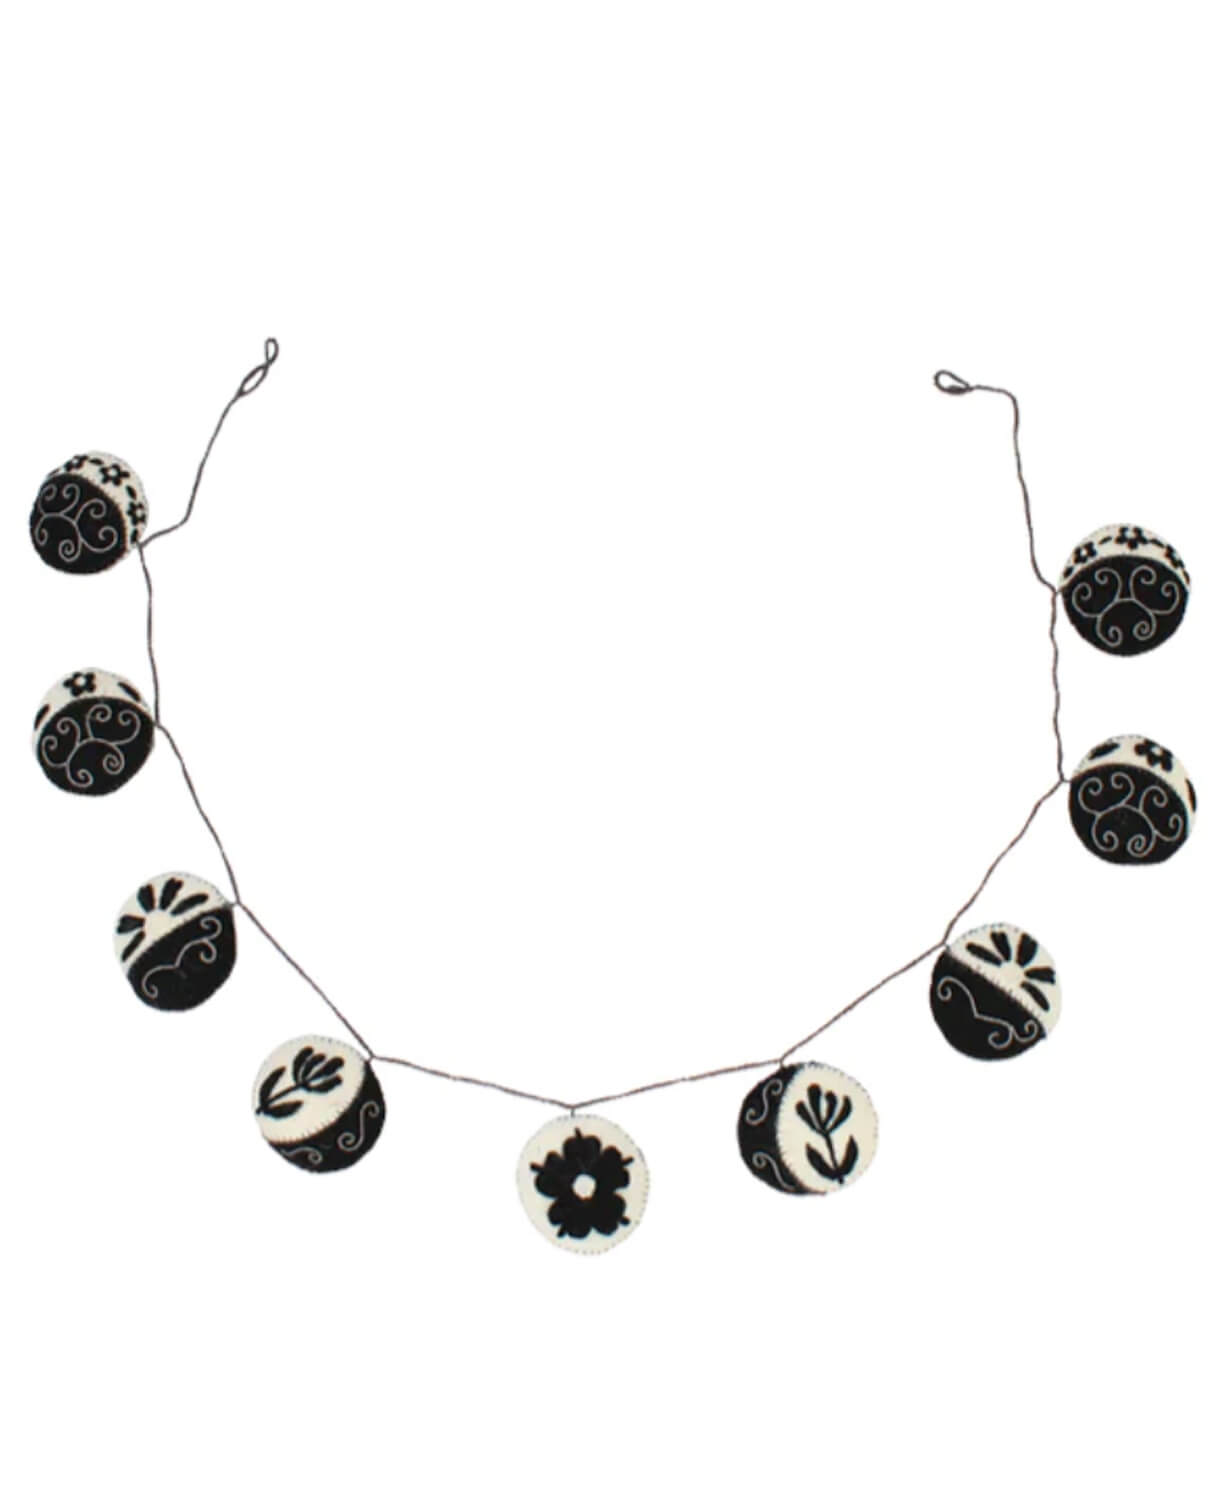 Moon Phases Garland in Black